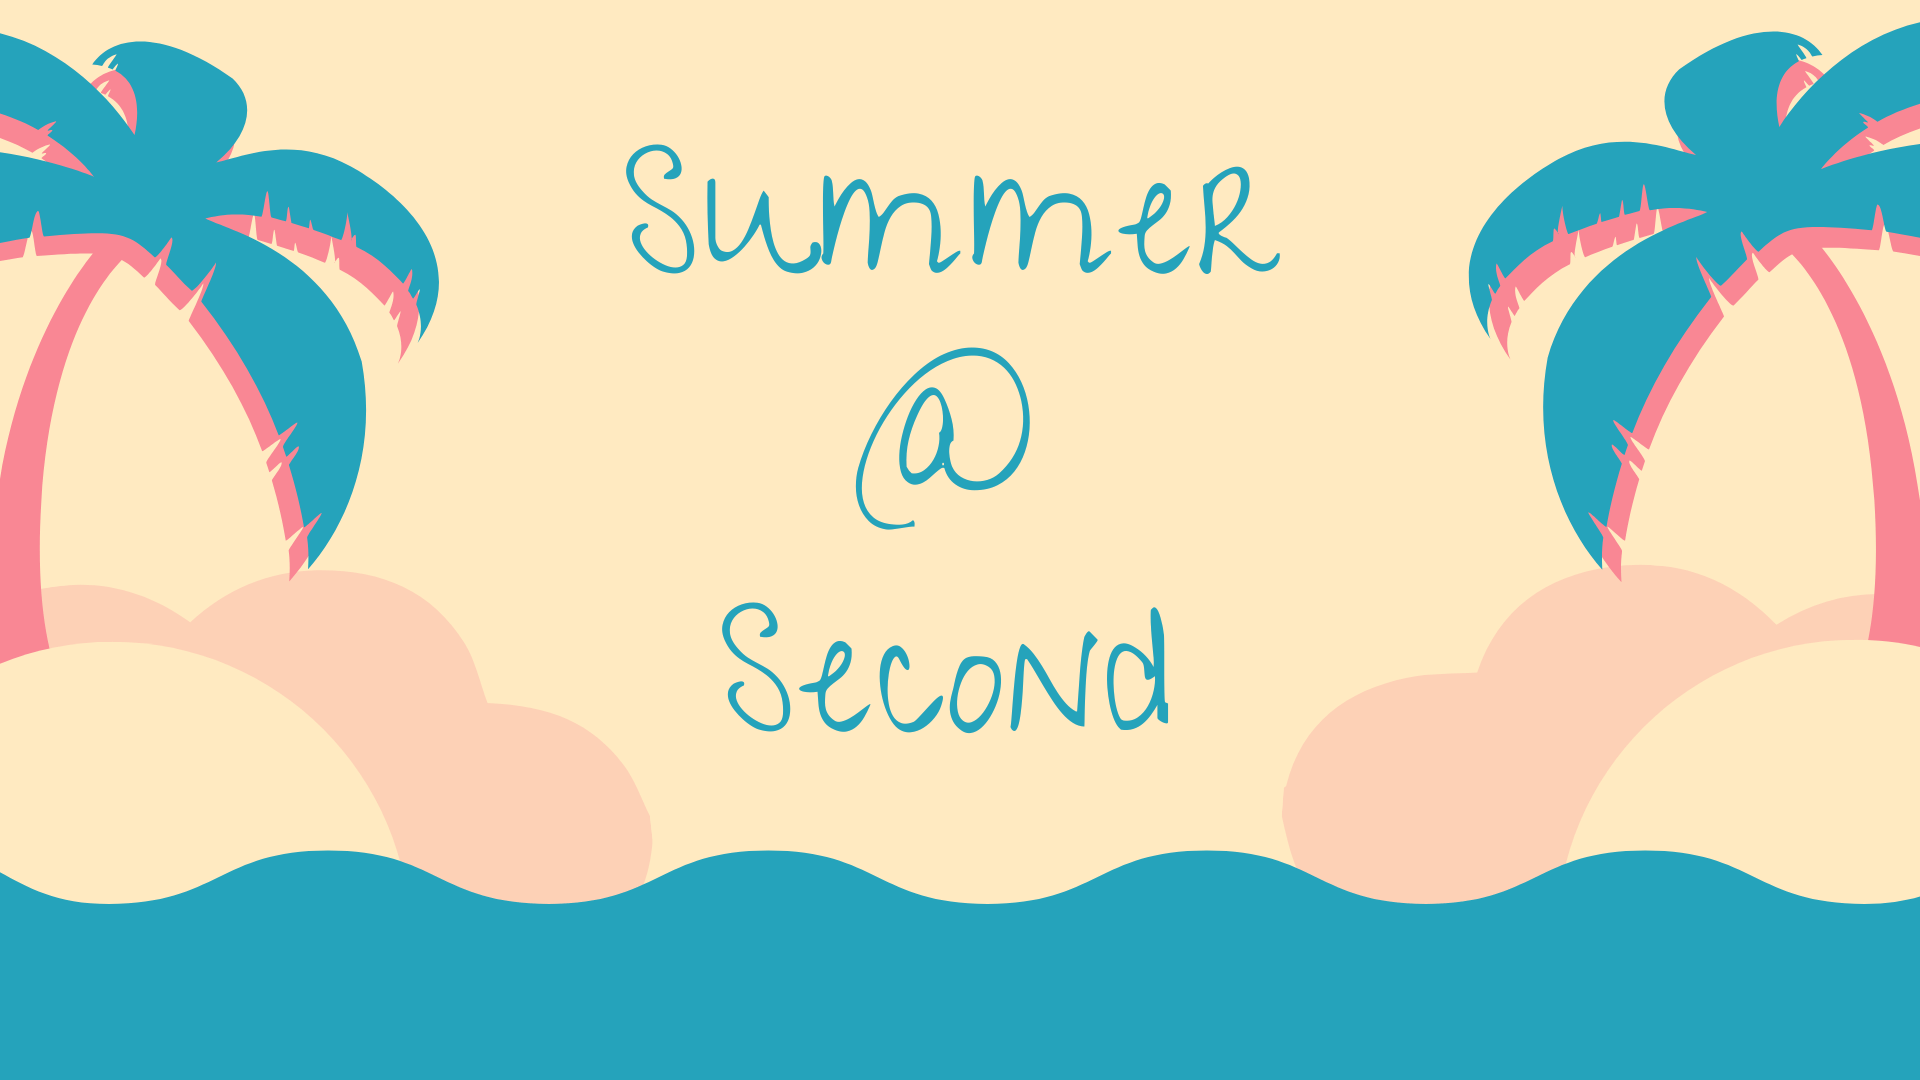 summer @ second with beach and palm tree motif